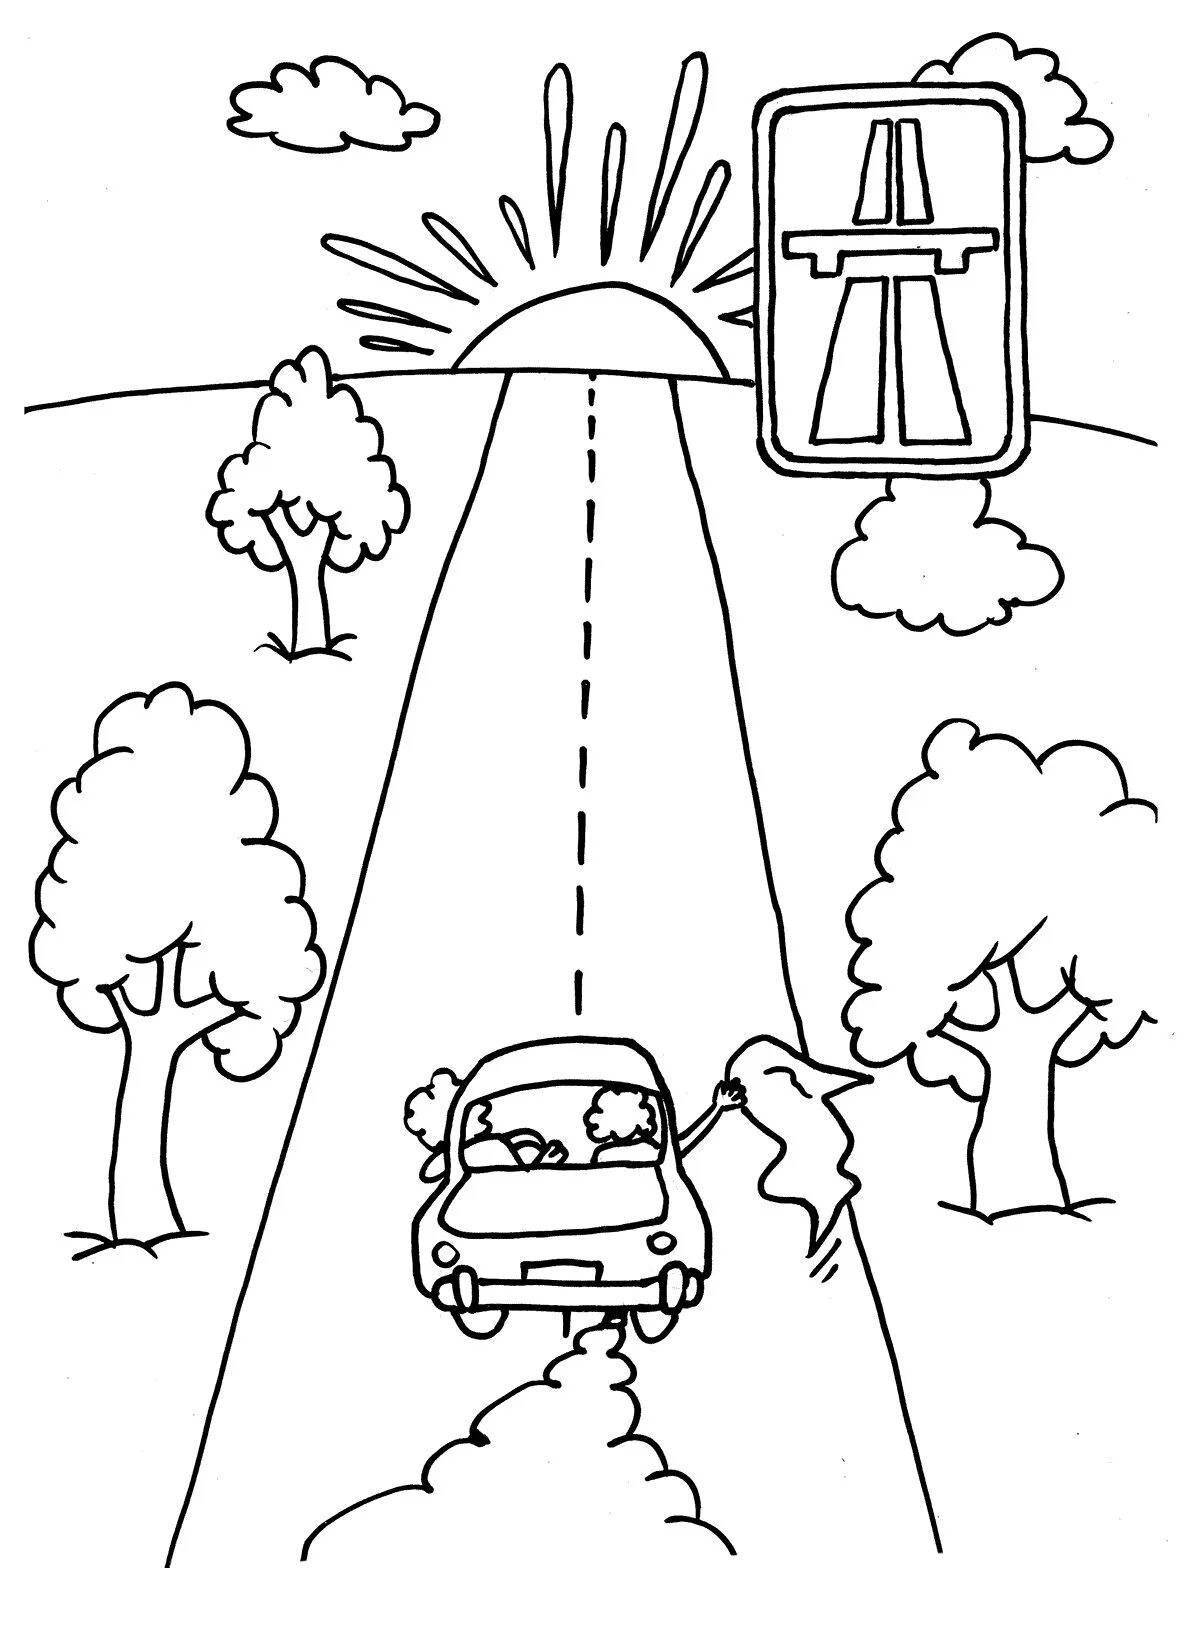 Colorful road of life coloring page for kids